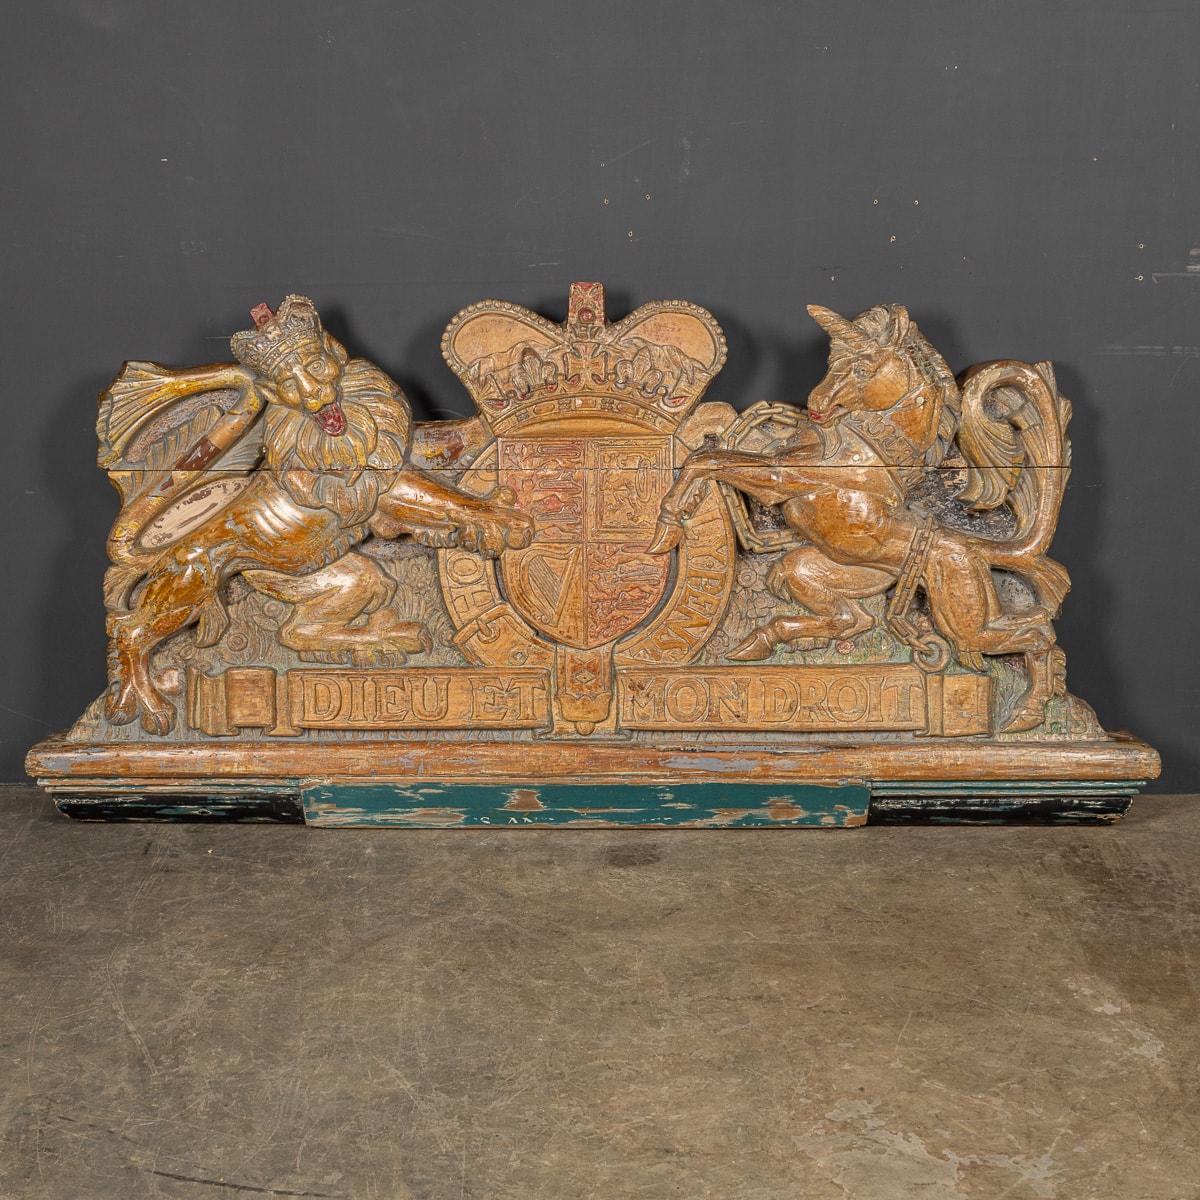 Antique early 20th Century large and impressive English Armorial Coat of Arms beautifully carved in two pieces. This crest has been gently restored and retains its natural patina created by age. An incredible piece of history and a very decorative